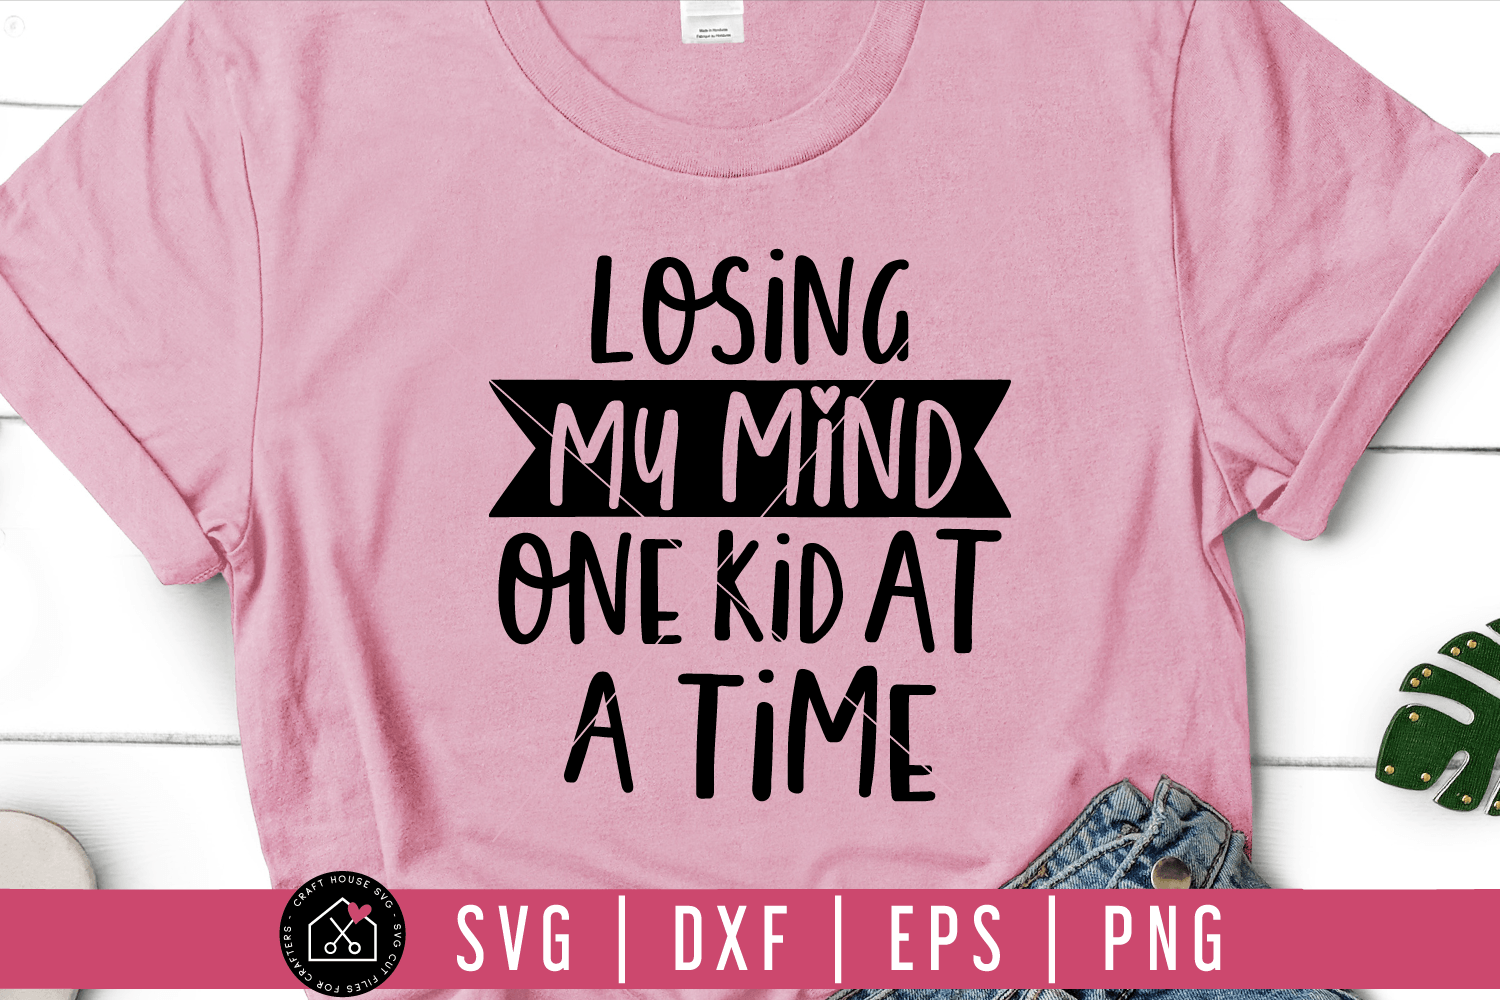 Losing my mind one kid at a time SVG | M54F Craft House SVG - SVG files for Cricut and Silhouette